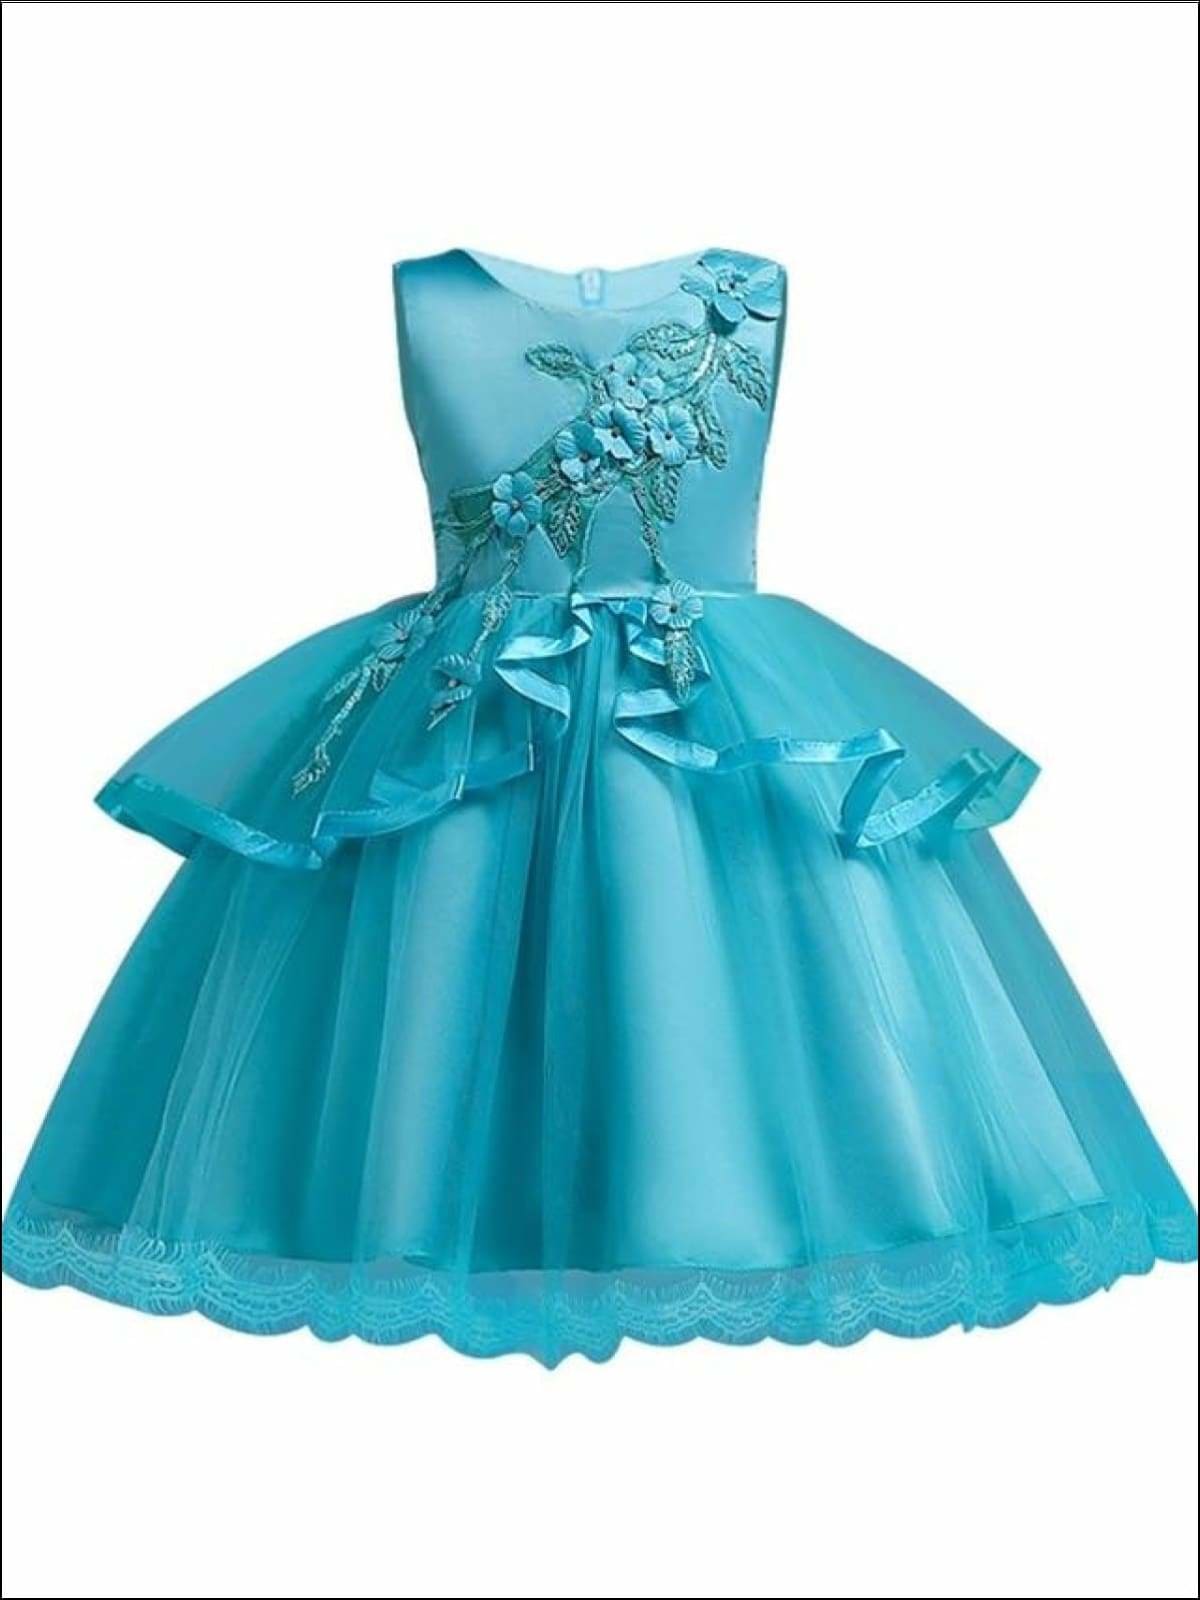 Girls Tiered Ruffle Flower Applique Special Occasion Dress - BLUE / 3T - Girls Dressy Dresses